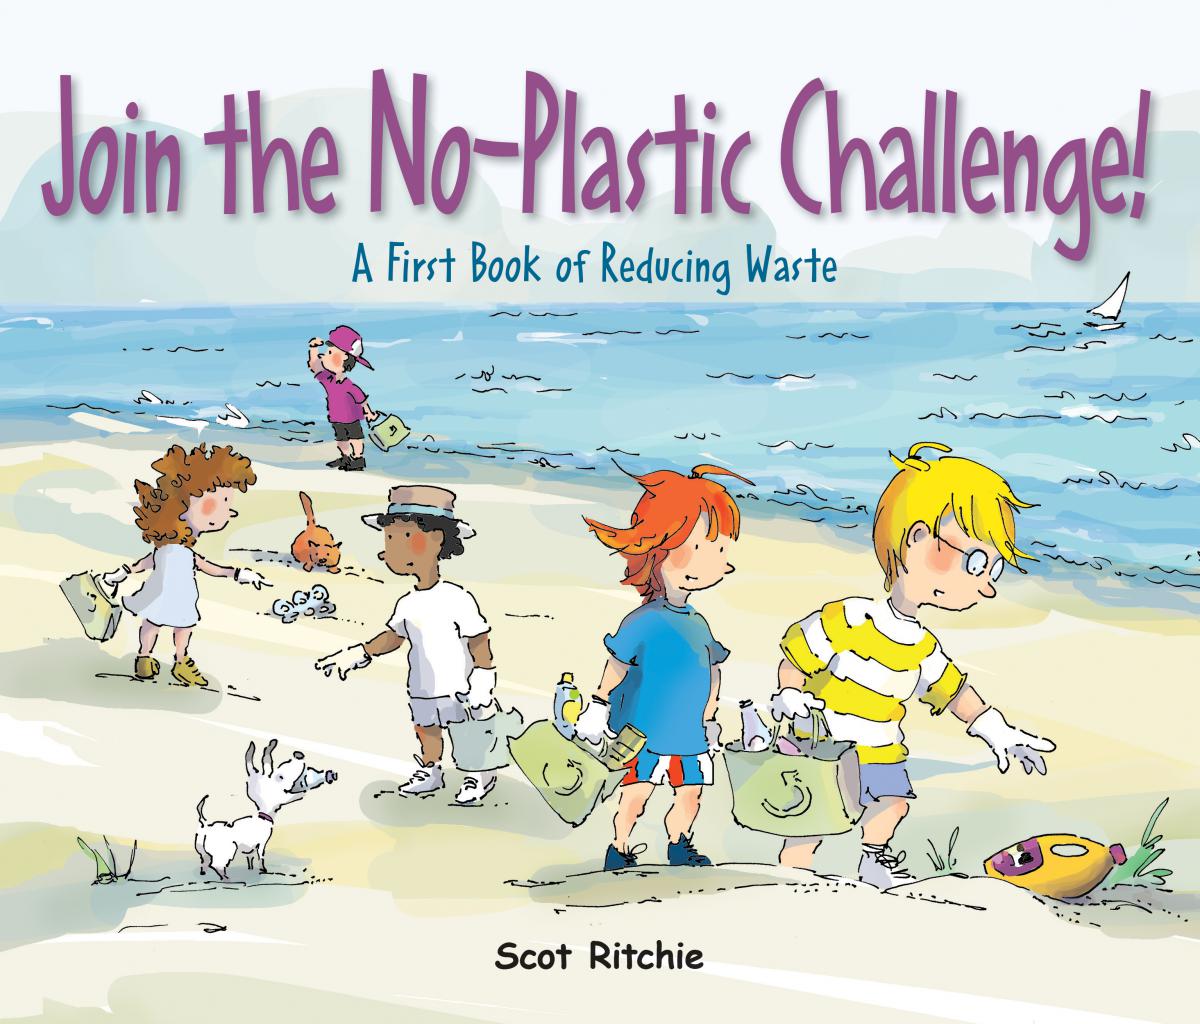  Join the No-Plastic Challenge! 